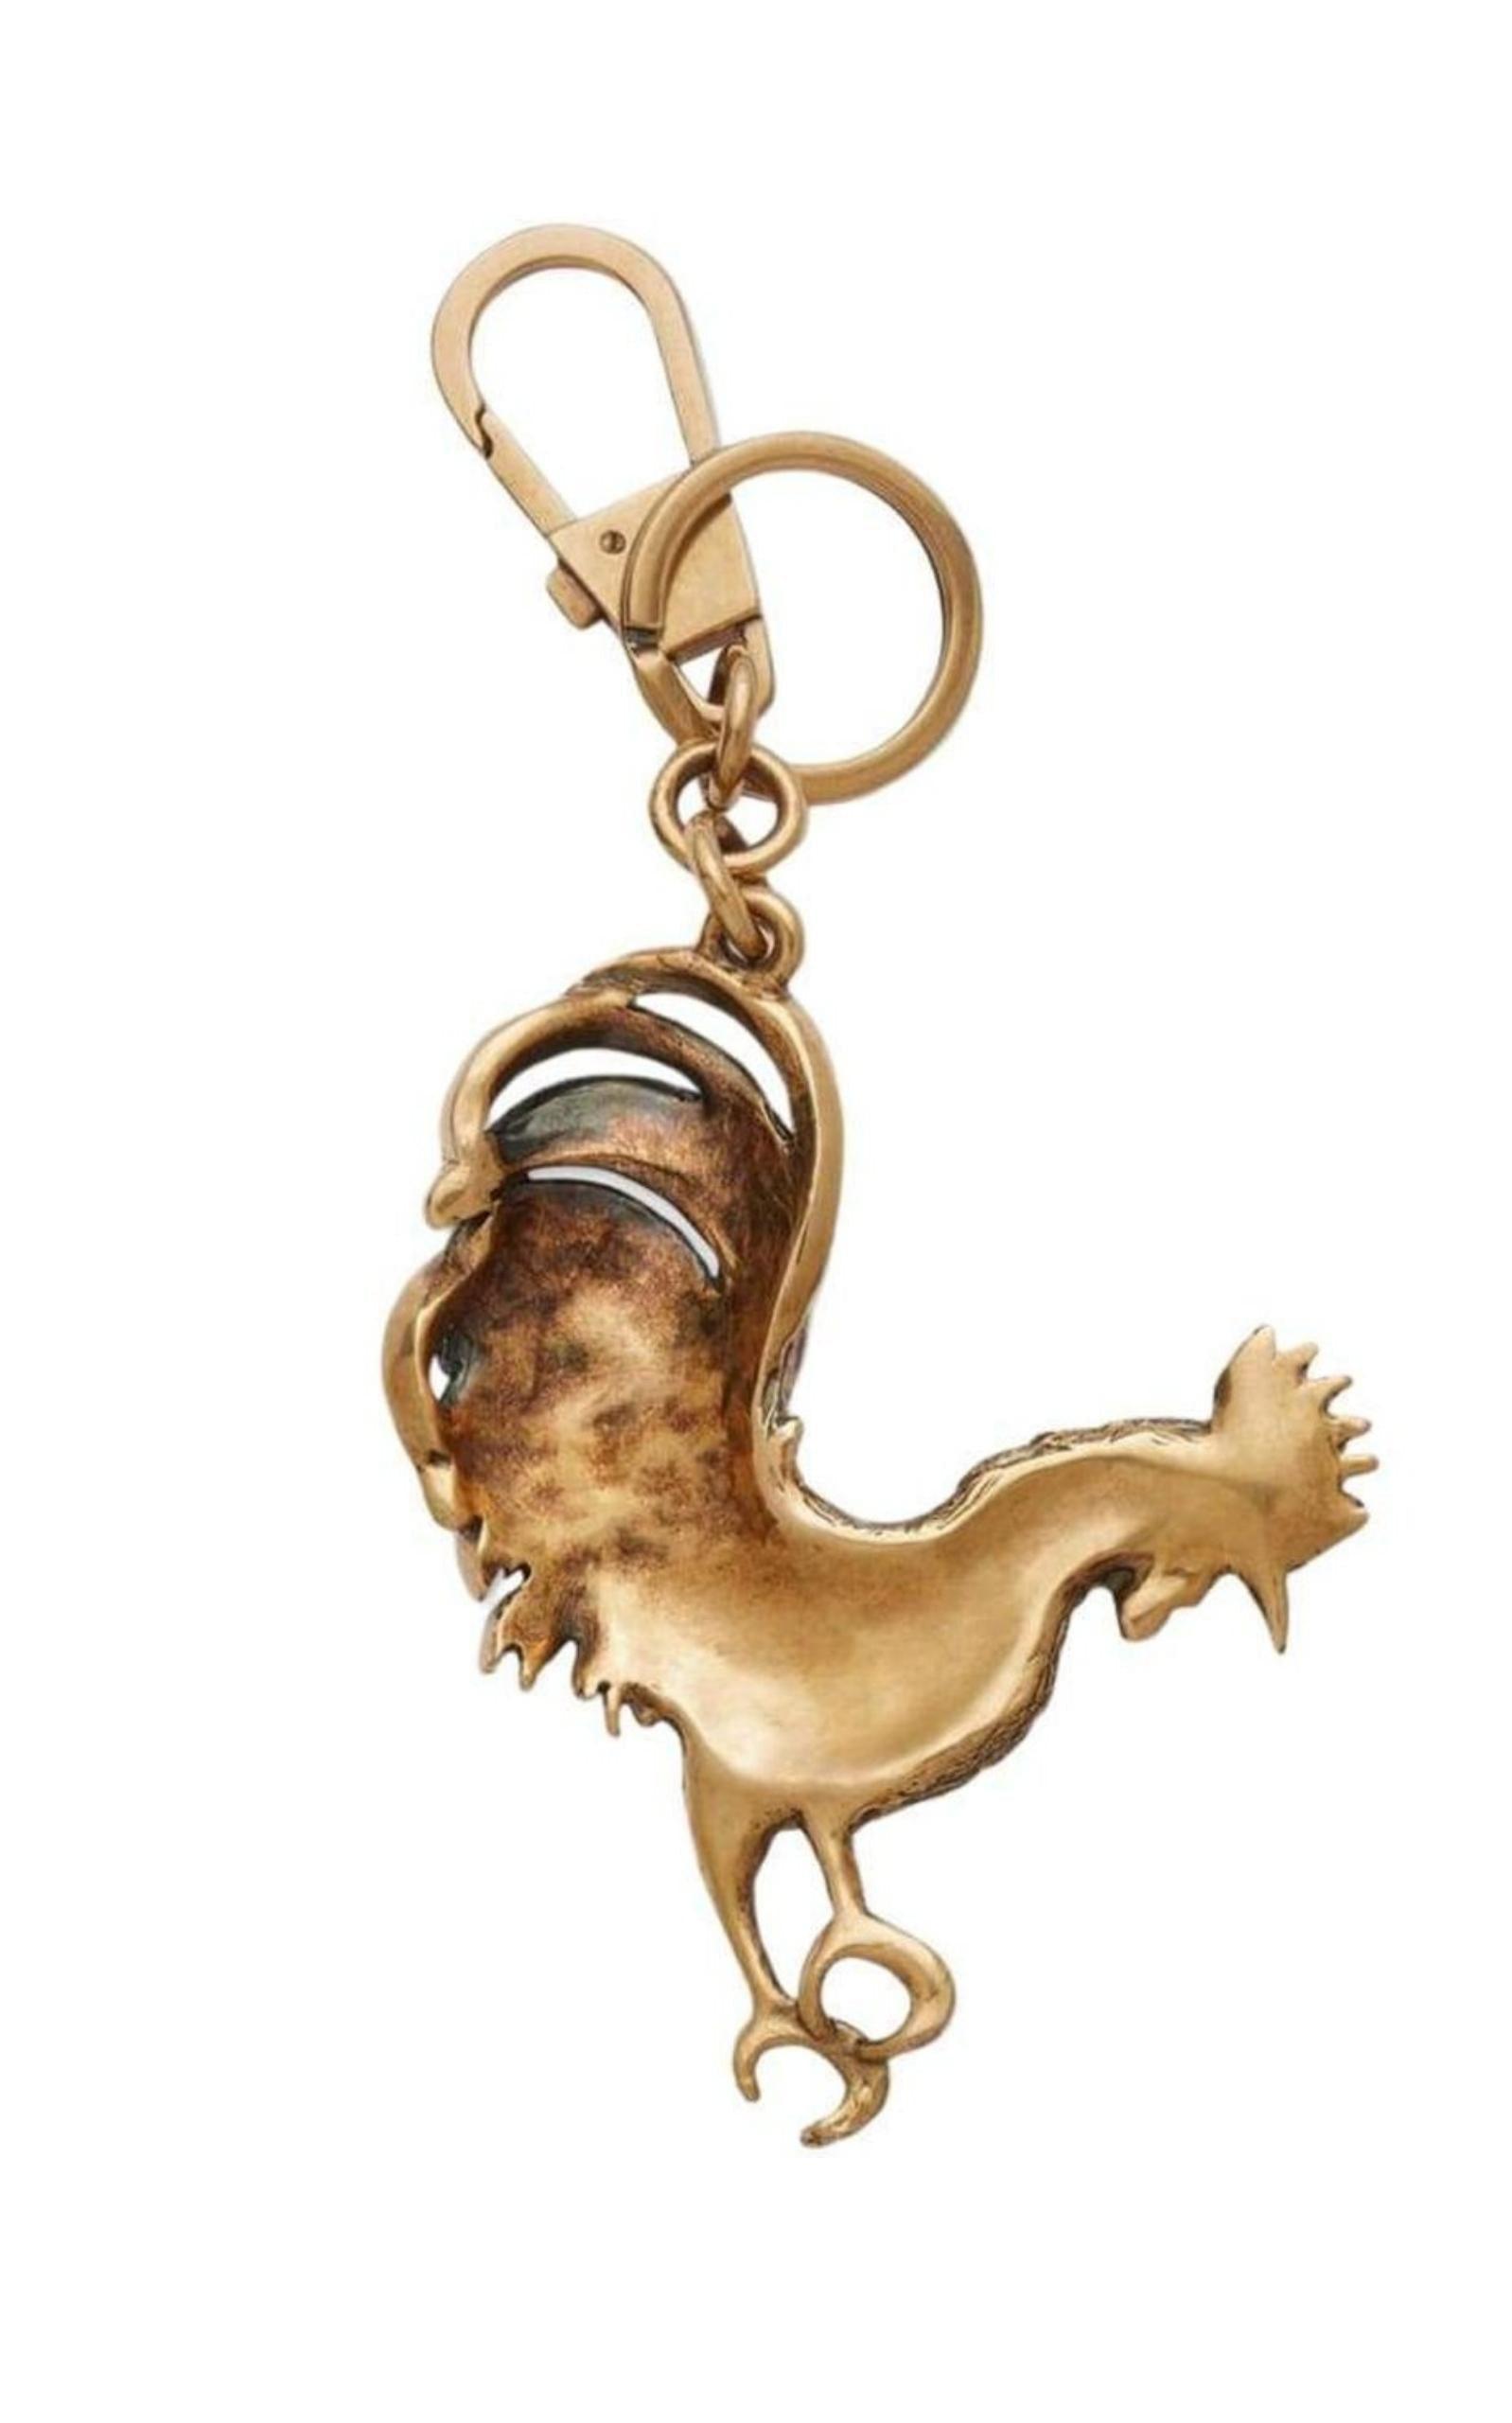  GucciChinese New Year Rooster Keychain - Runway Catalog